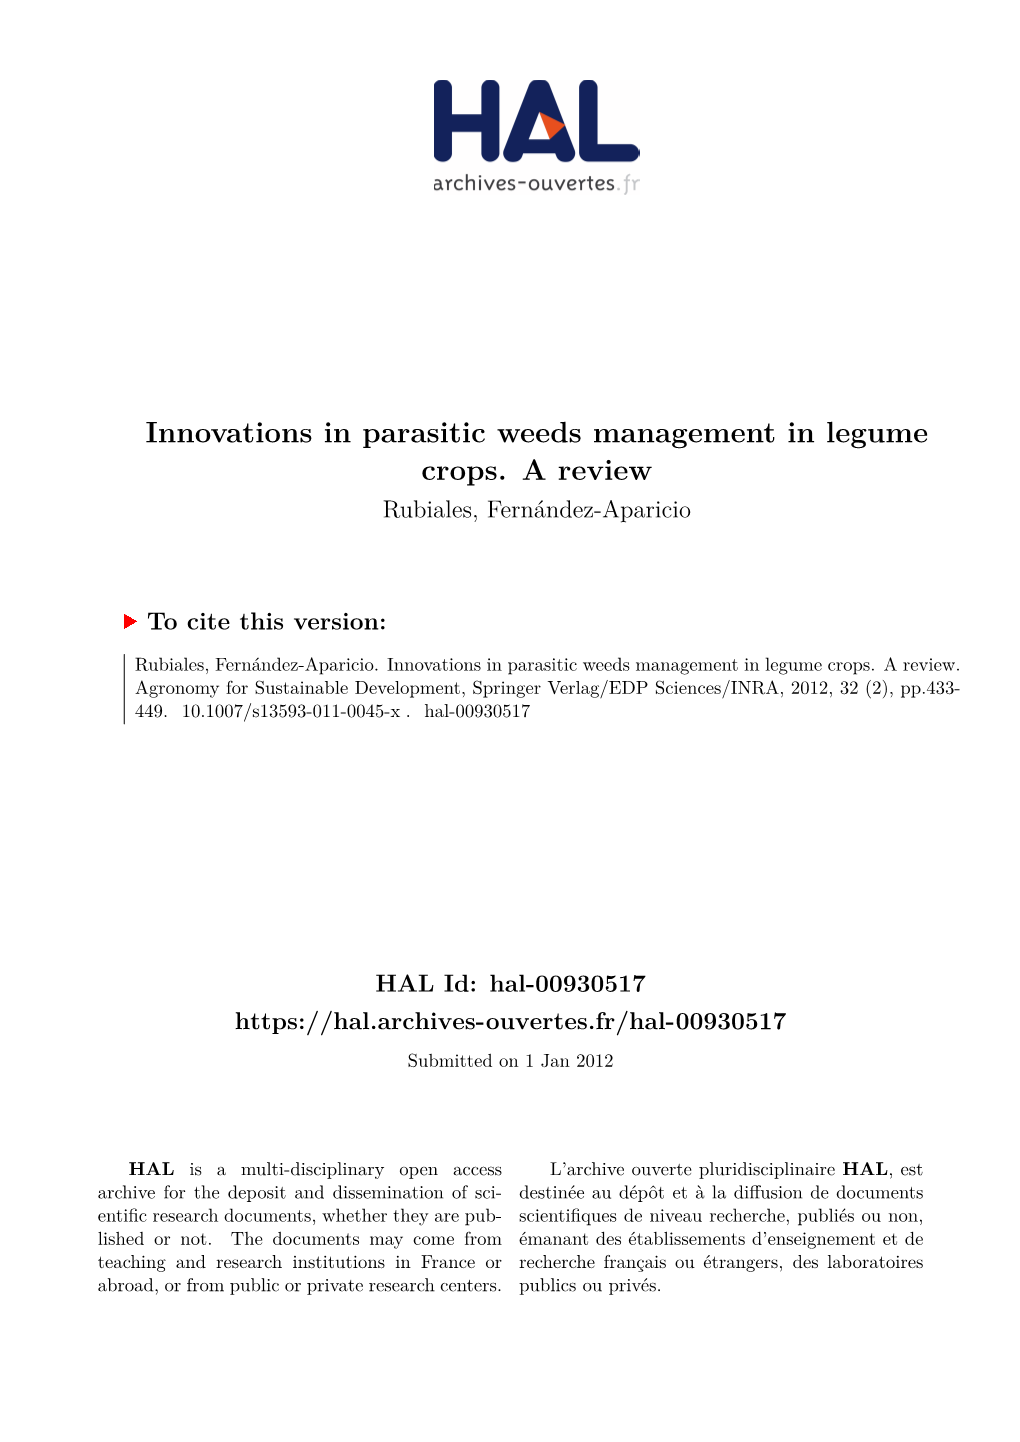 Innovations in Parasitic Weeds Management in Legume Crops. a Review Rubiales, Fernández-Aparicio